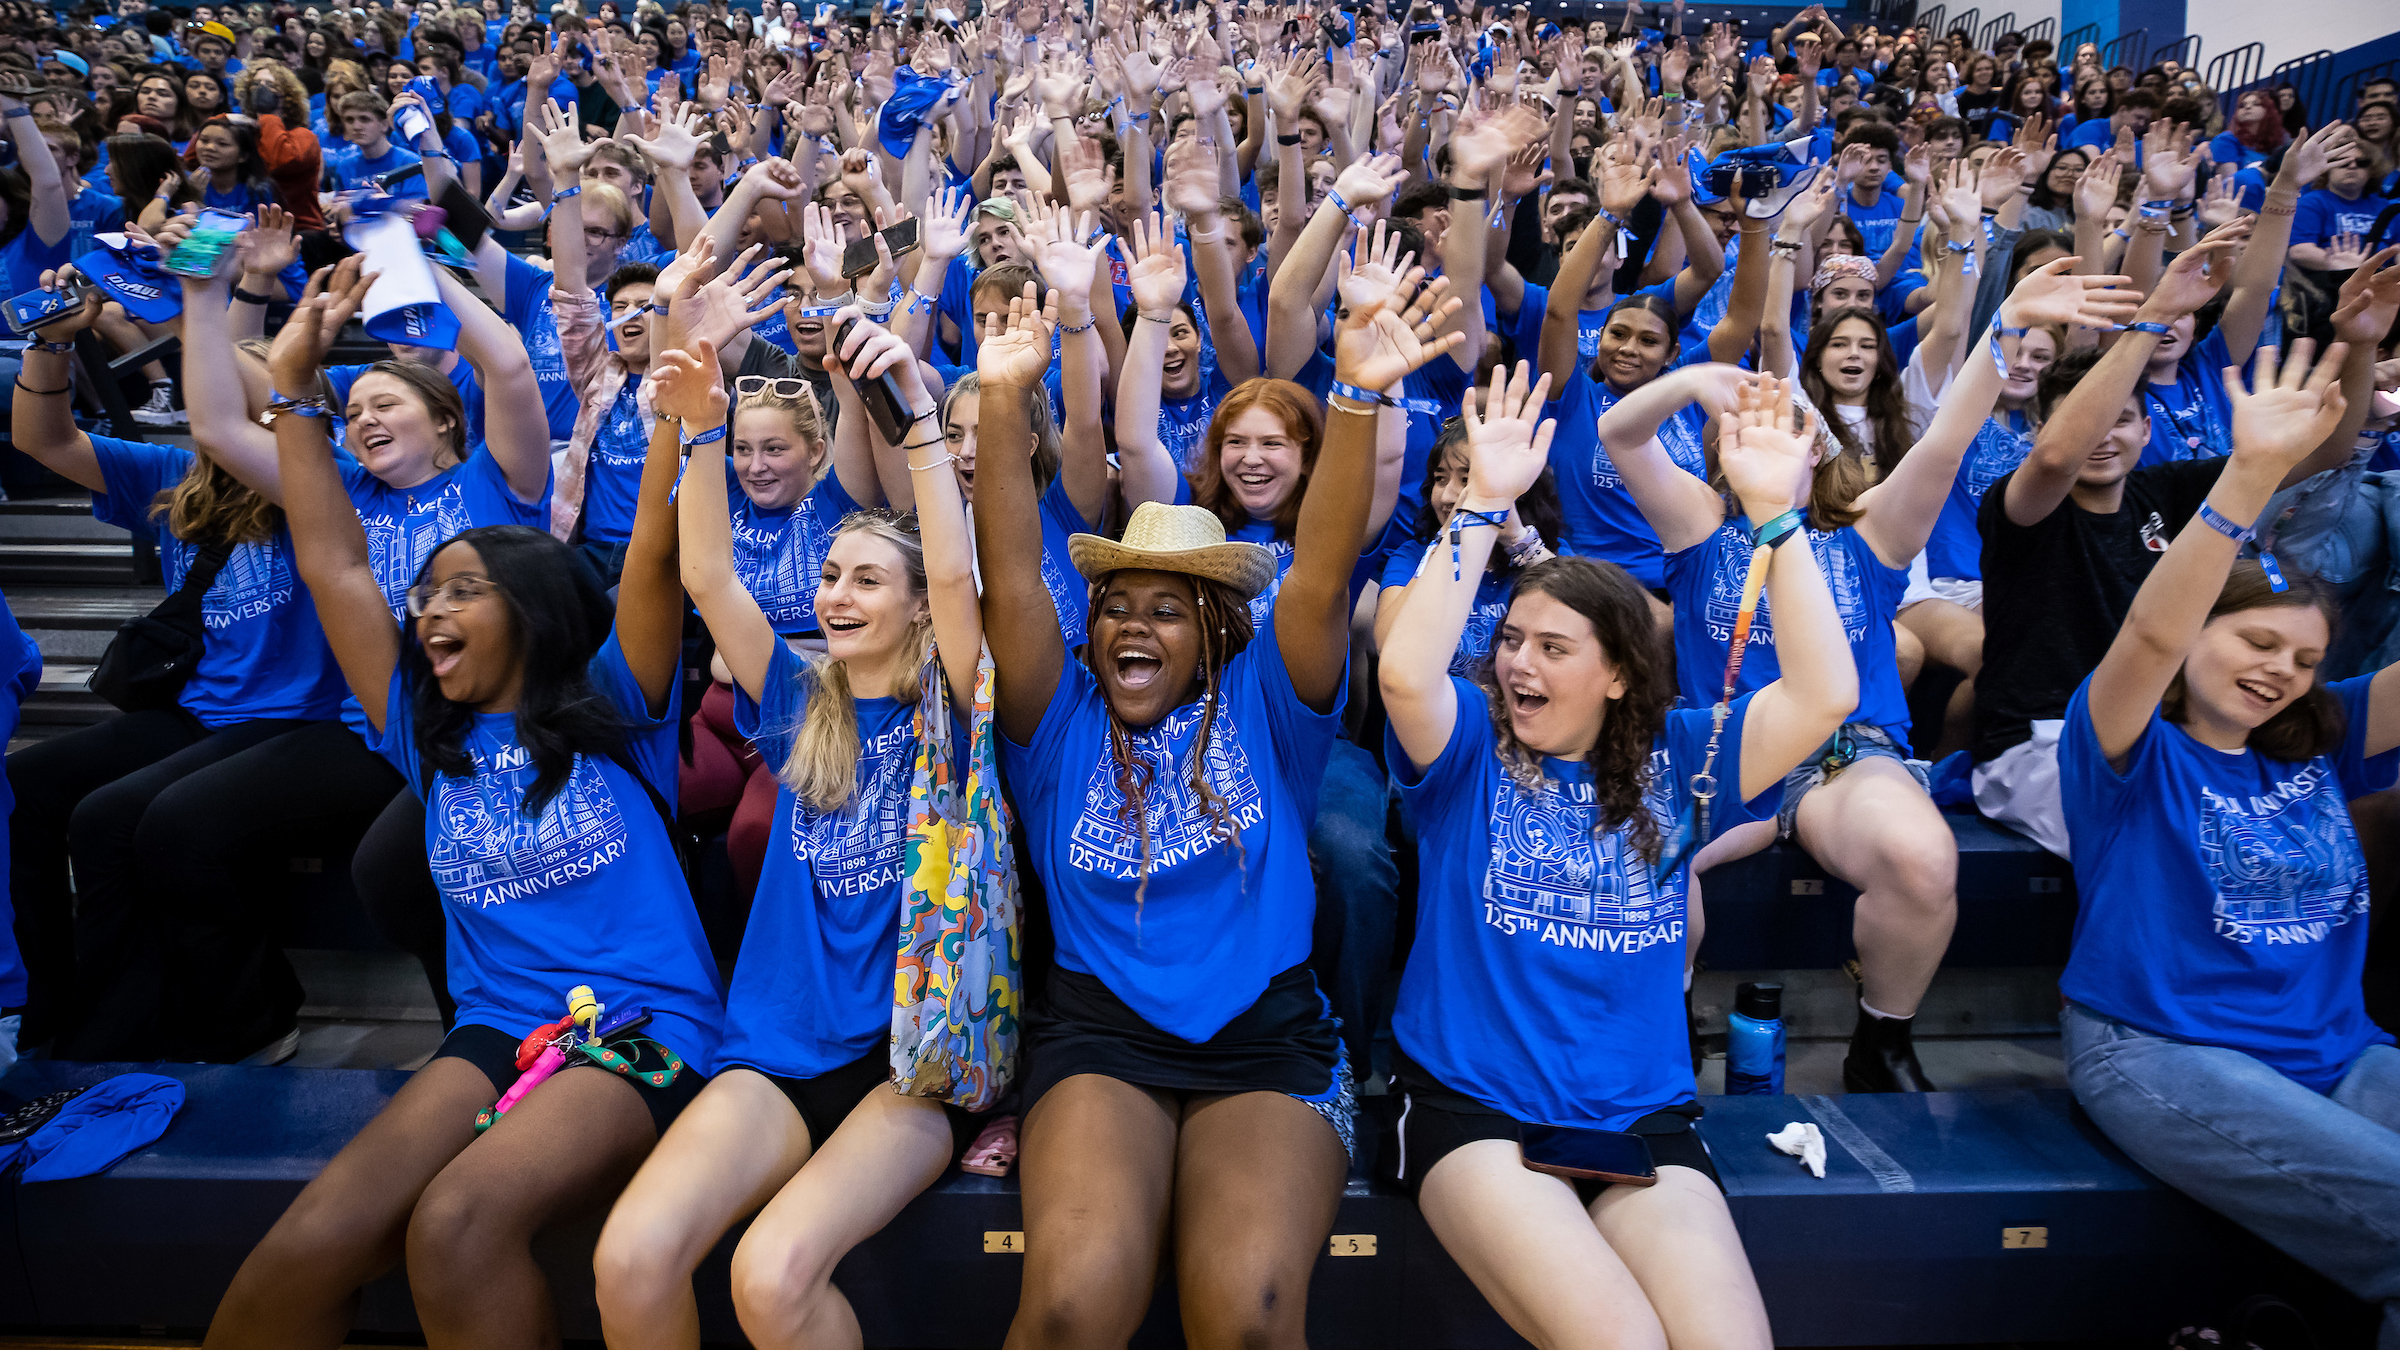 Students wearing blue shirts cheering in bleachers during Welcome event